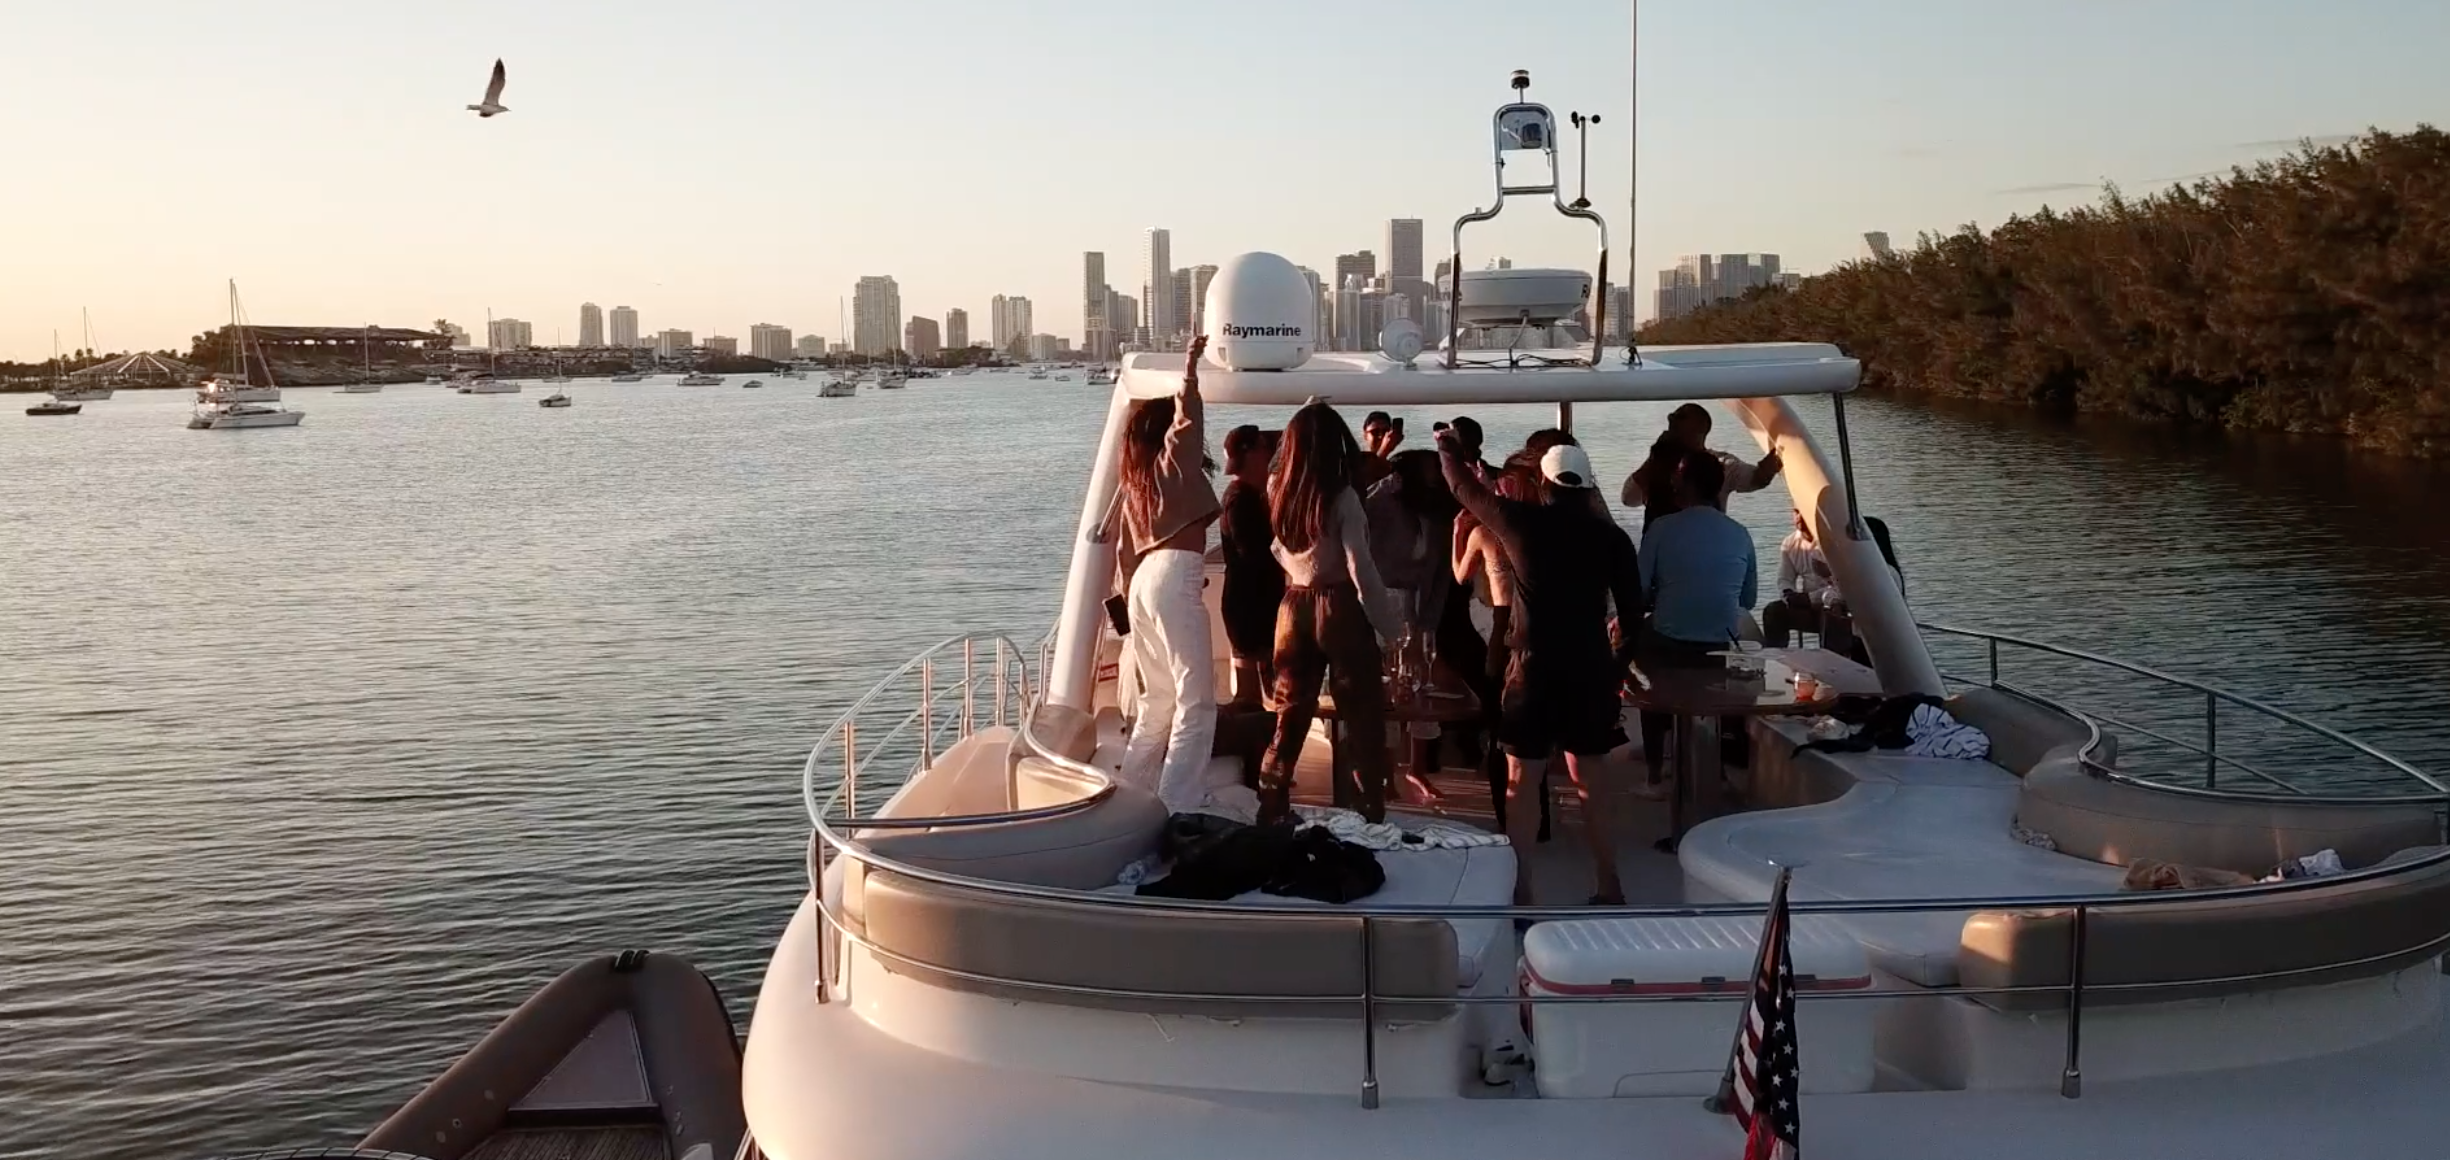 What to Expect When You Spend Your Weekend on a Party Boat?